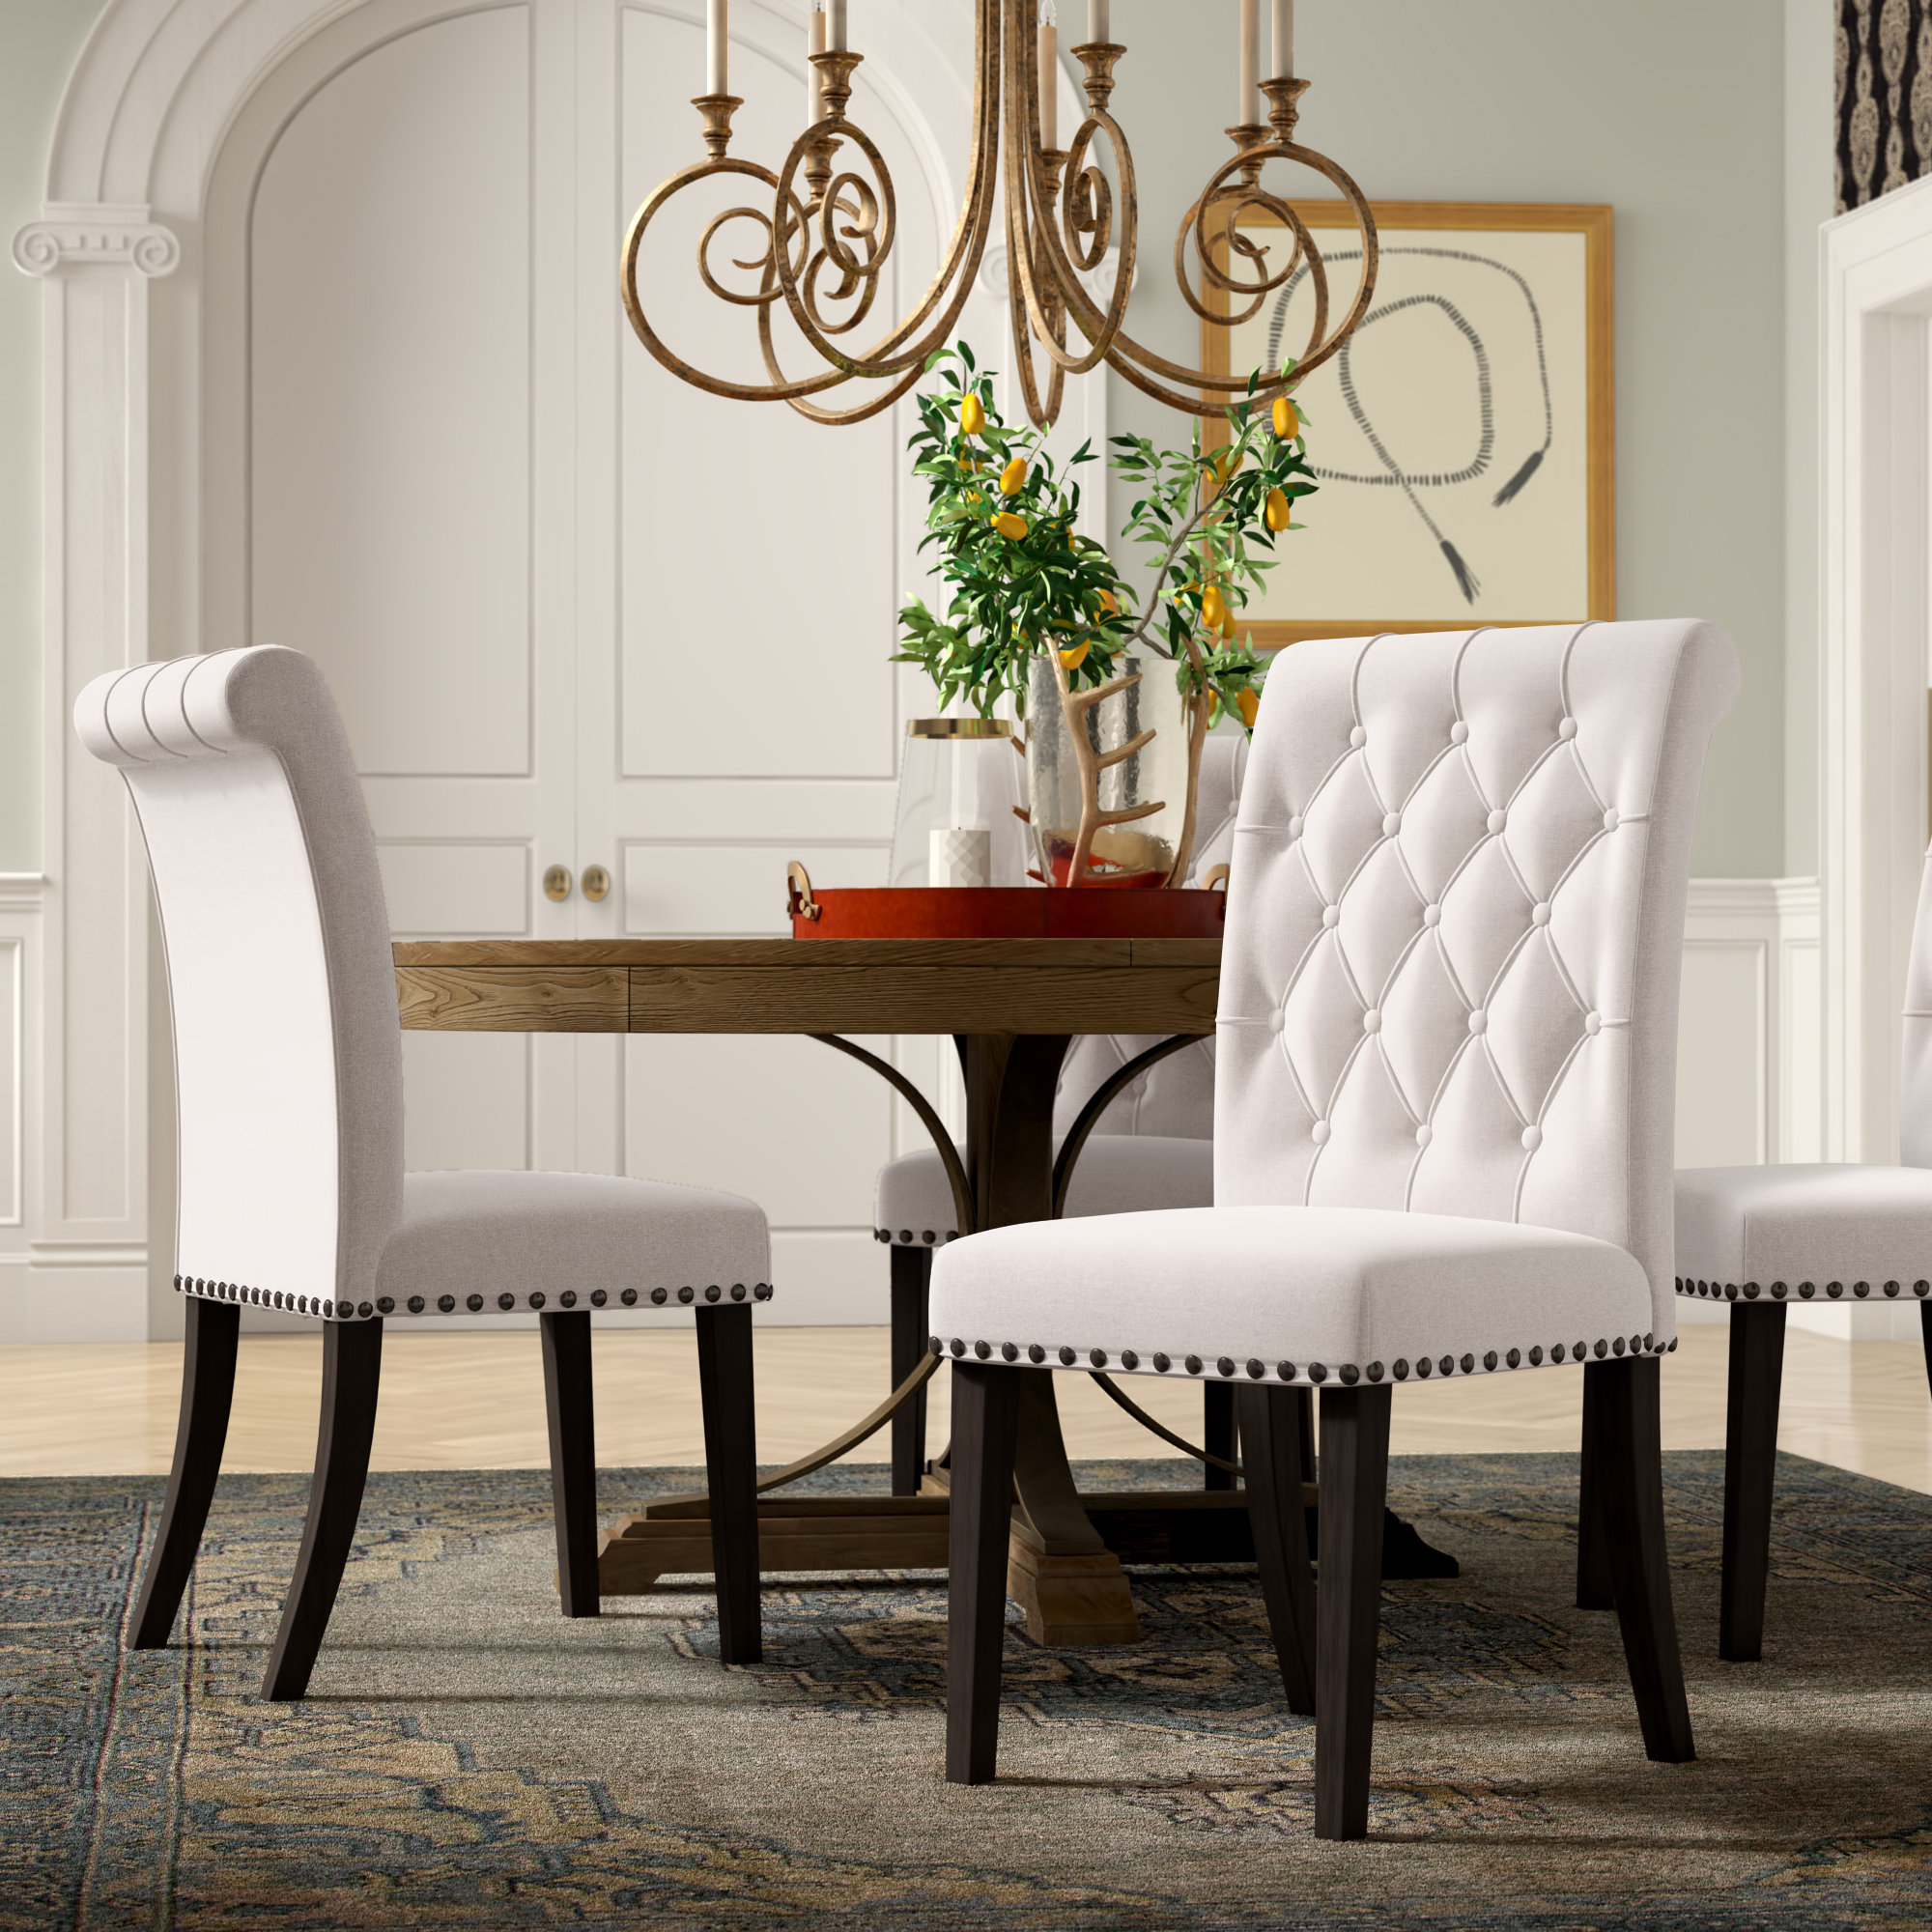 Darby Home Co Cheston Upholstered Dining Chair Reviews